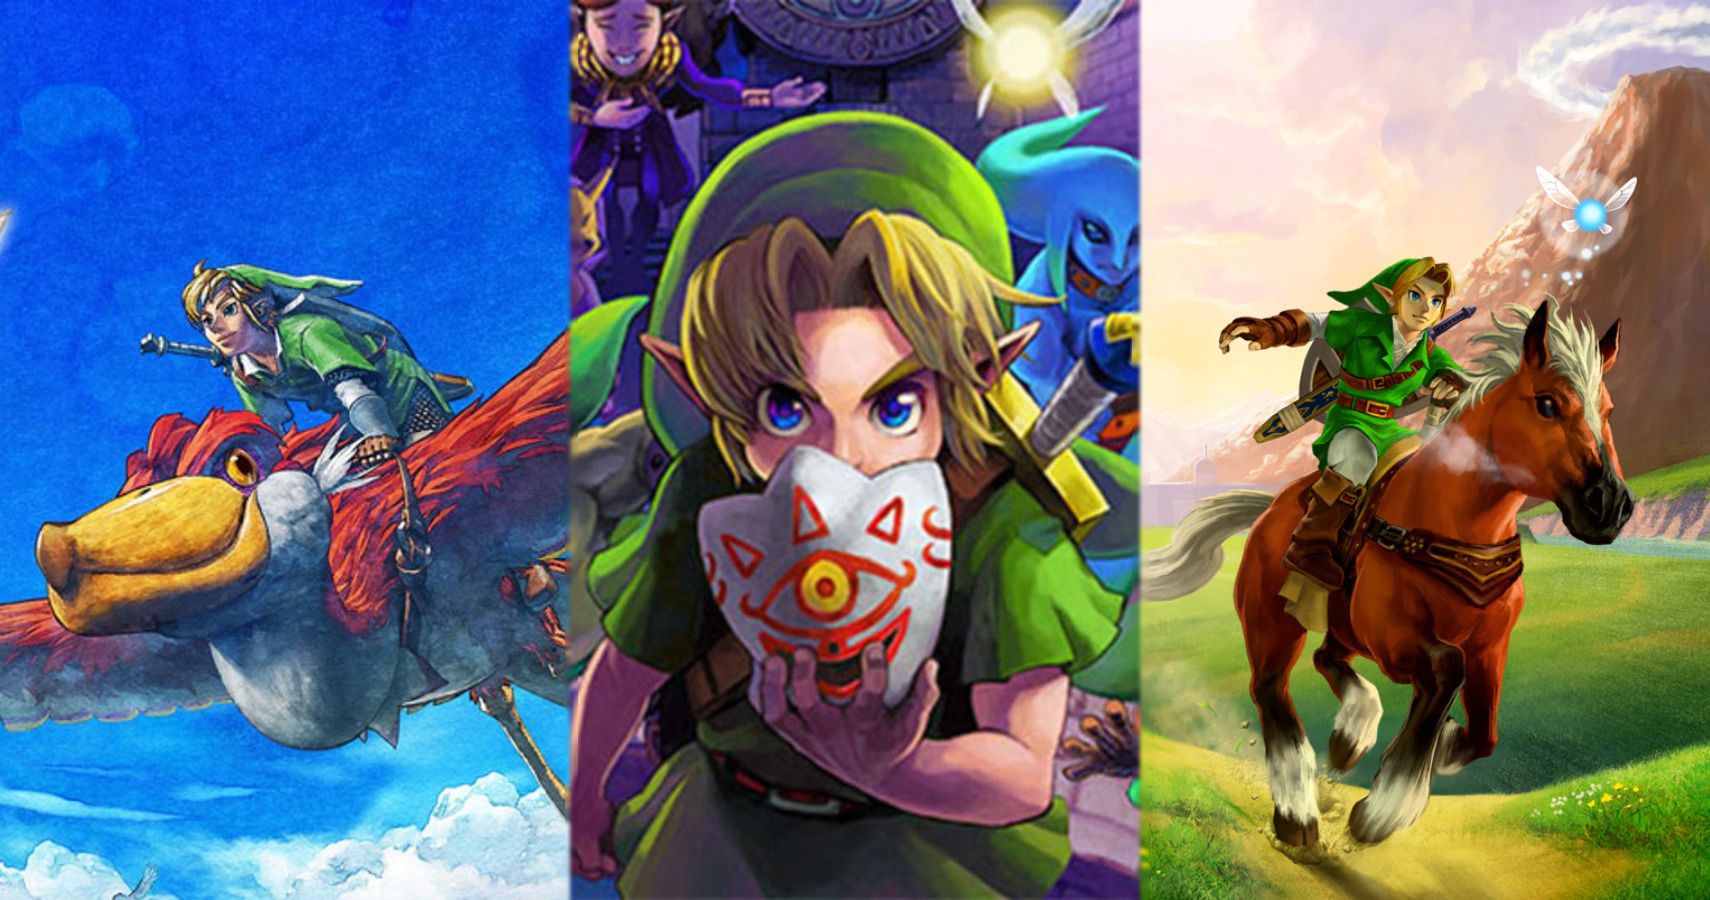 will old zelda games come to switch